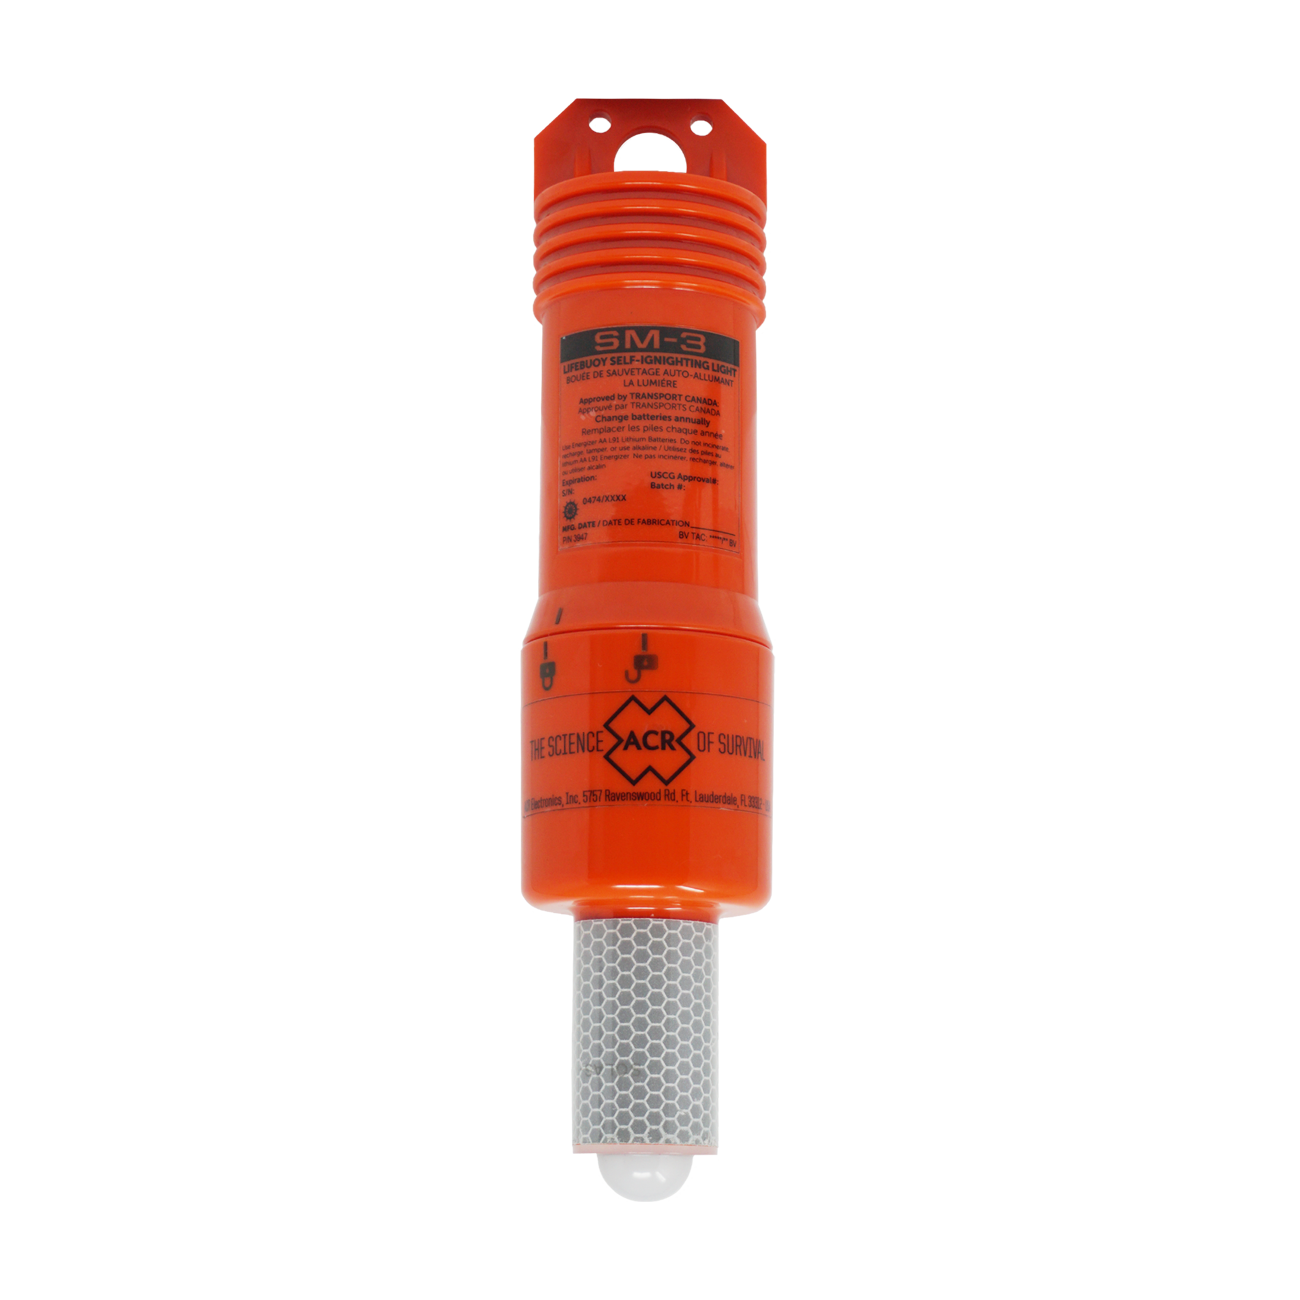 Emergency hand lamps and step marker lamps: stylish safety